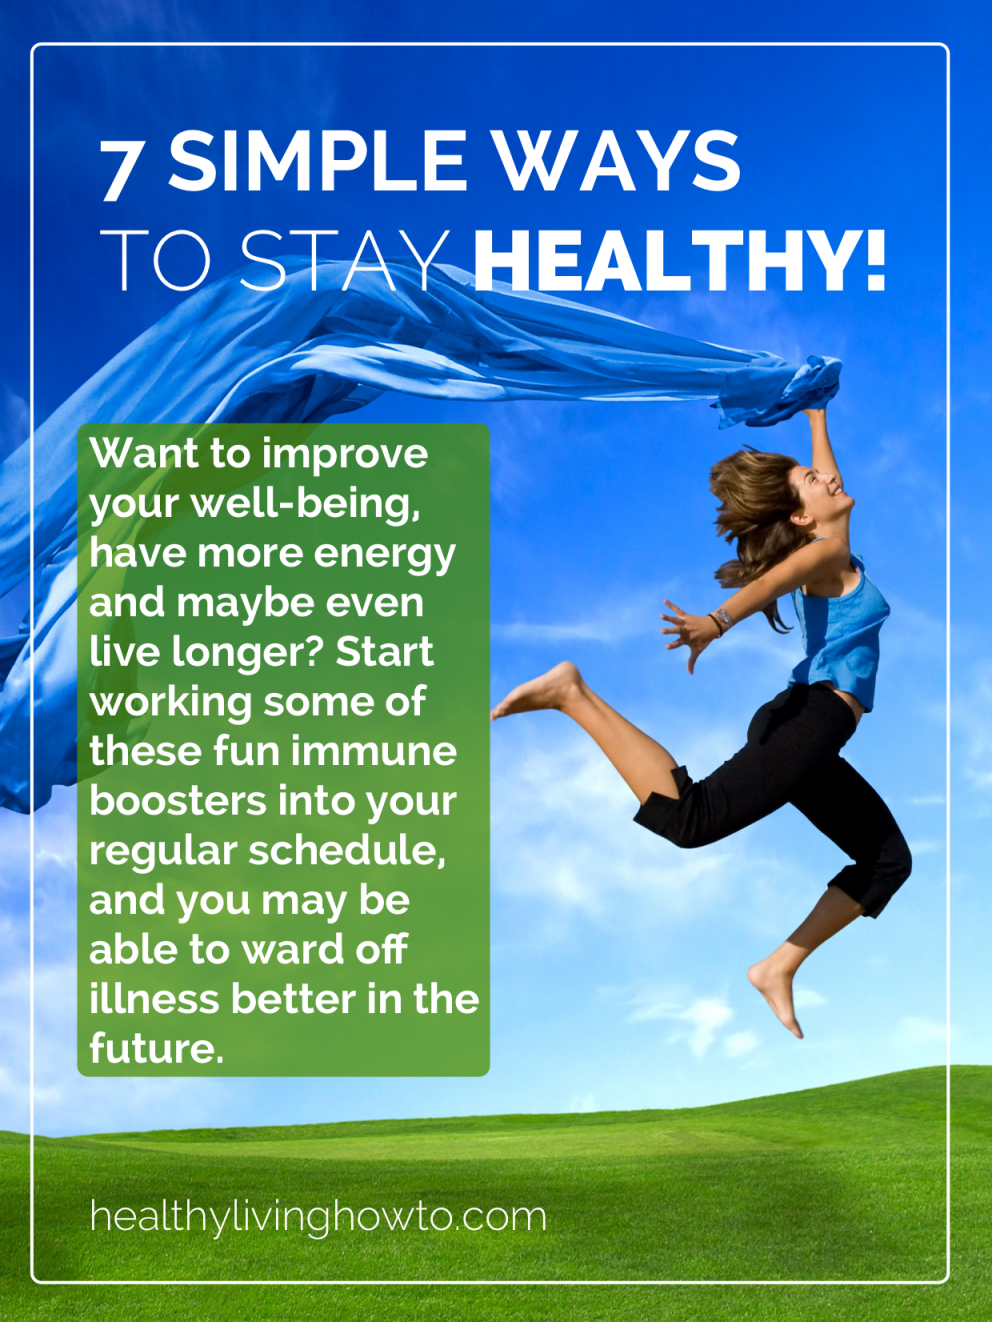 New ways to life. What to do to stay healthy. Tips to stay healthy. Healthy way of Life. How to be healthy лексика.